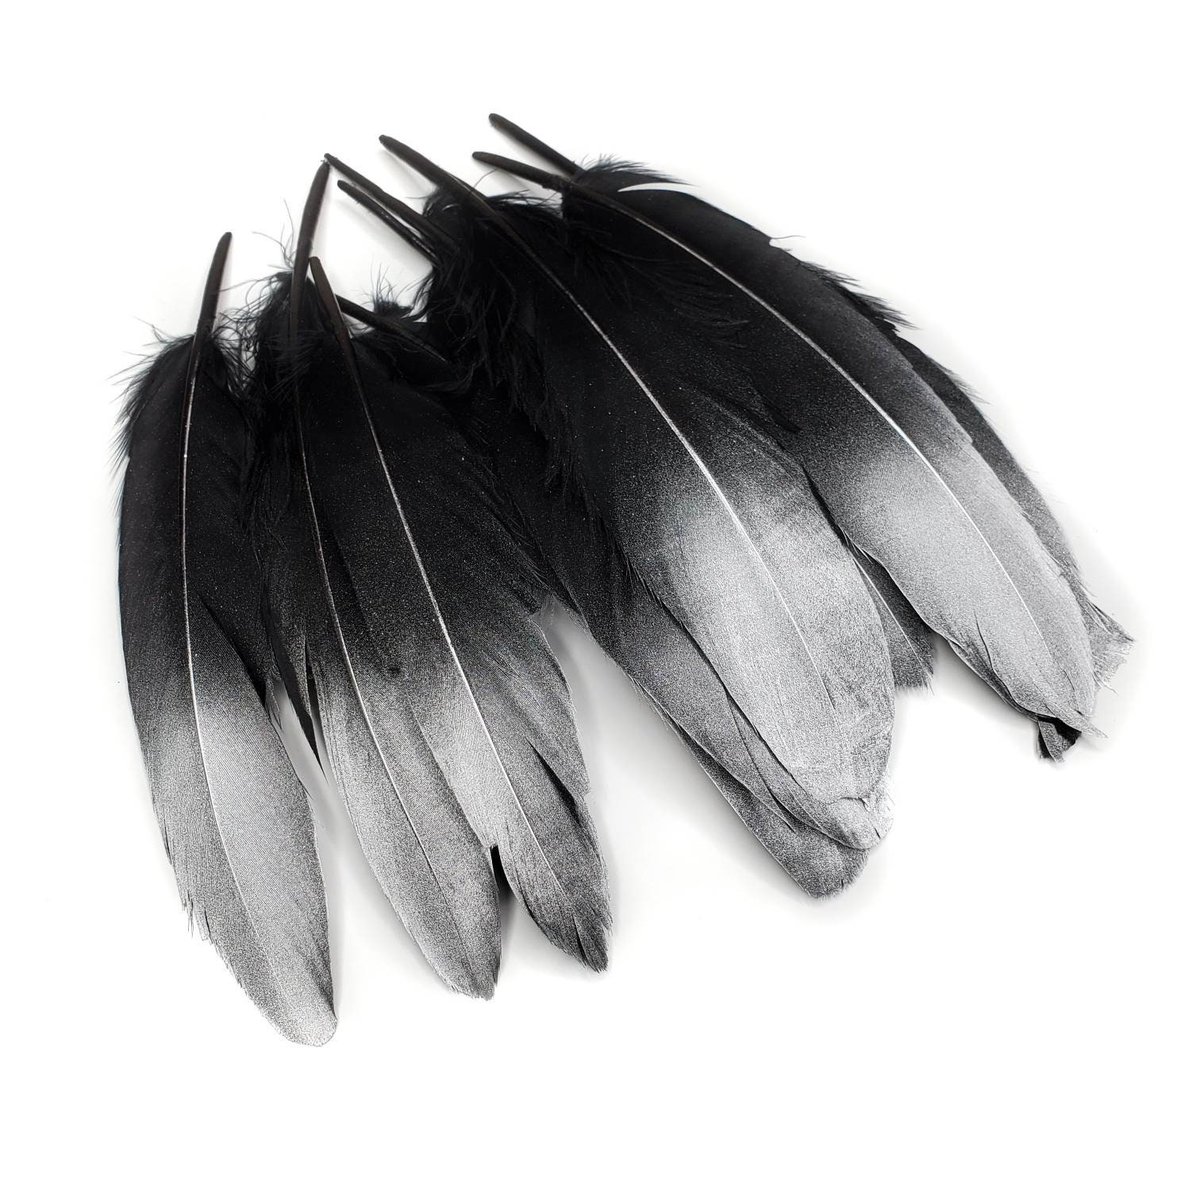 16 Pcs Mixed Black Feathers Gold Feathers Silver Feathers Goose